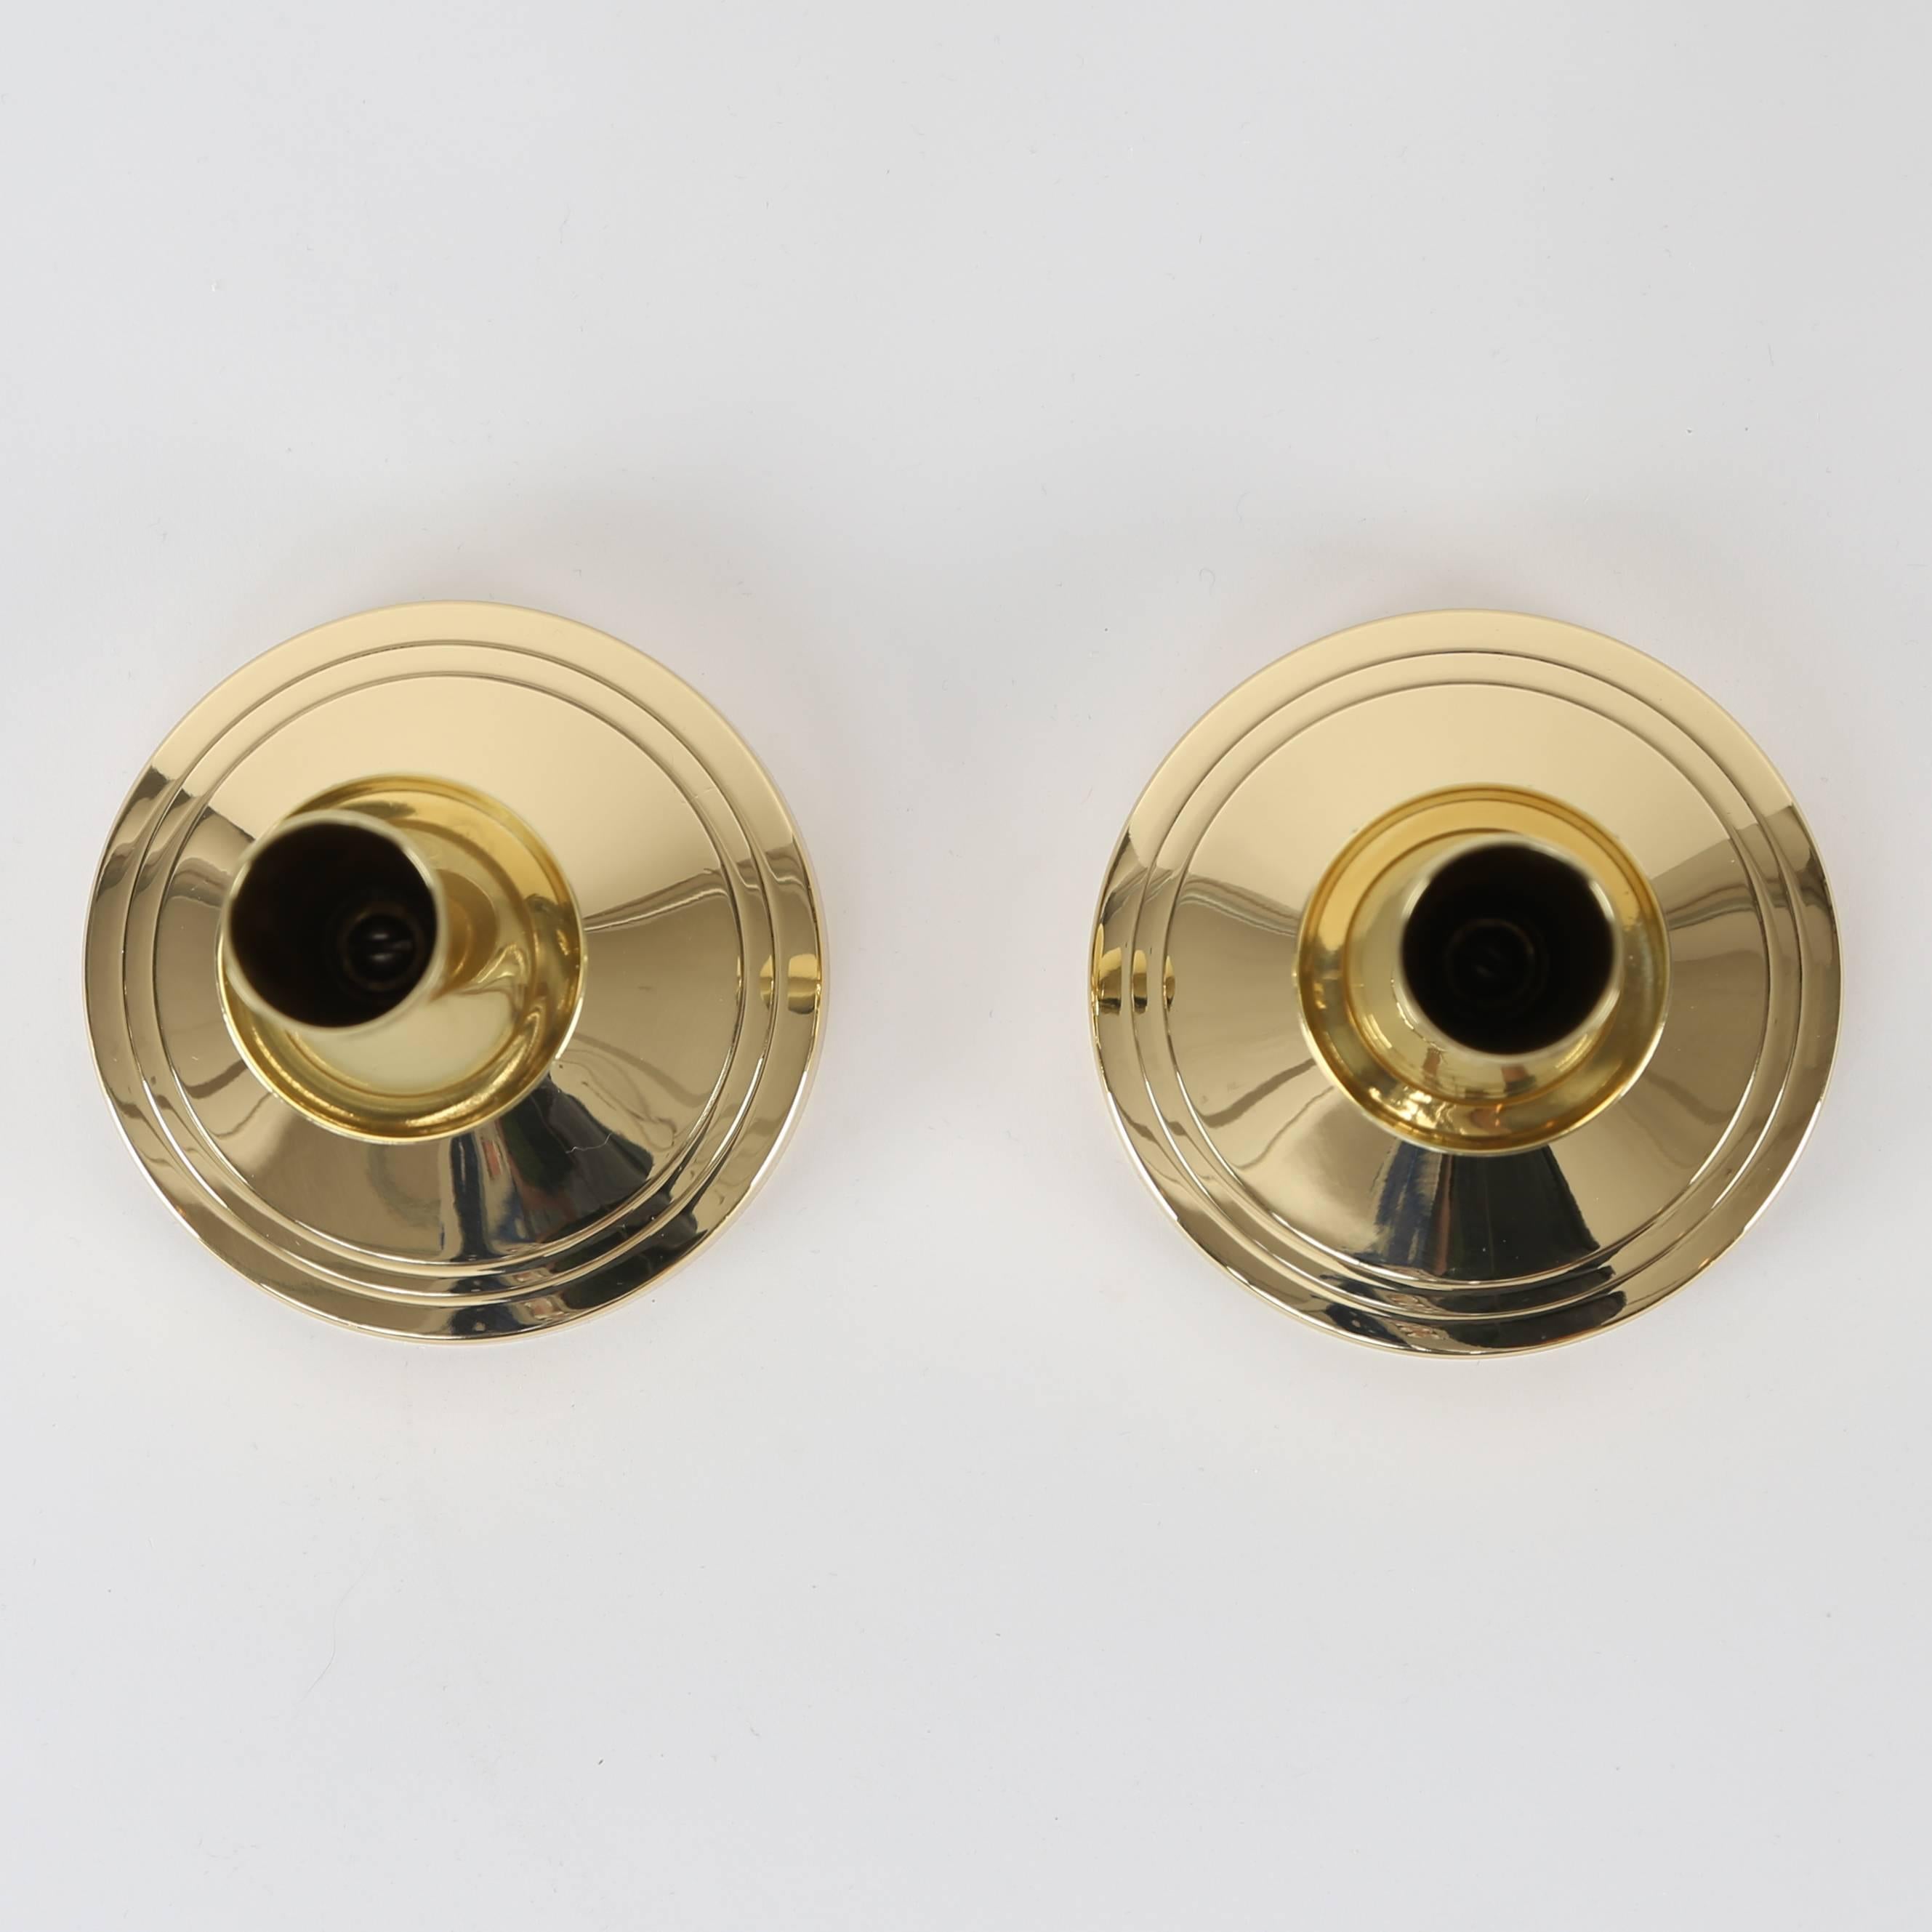 Lacquered Pair of Tommi Parzinger Brass Candleholders, circa 1950s For Sale